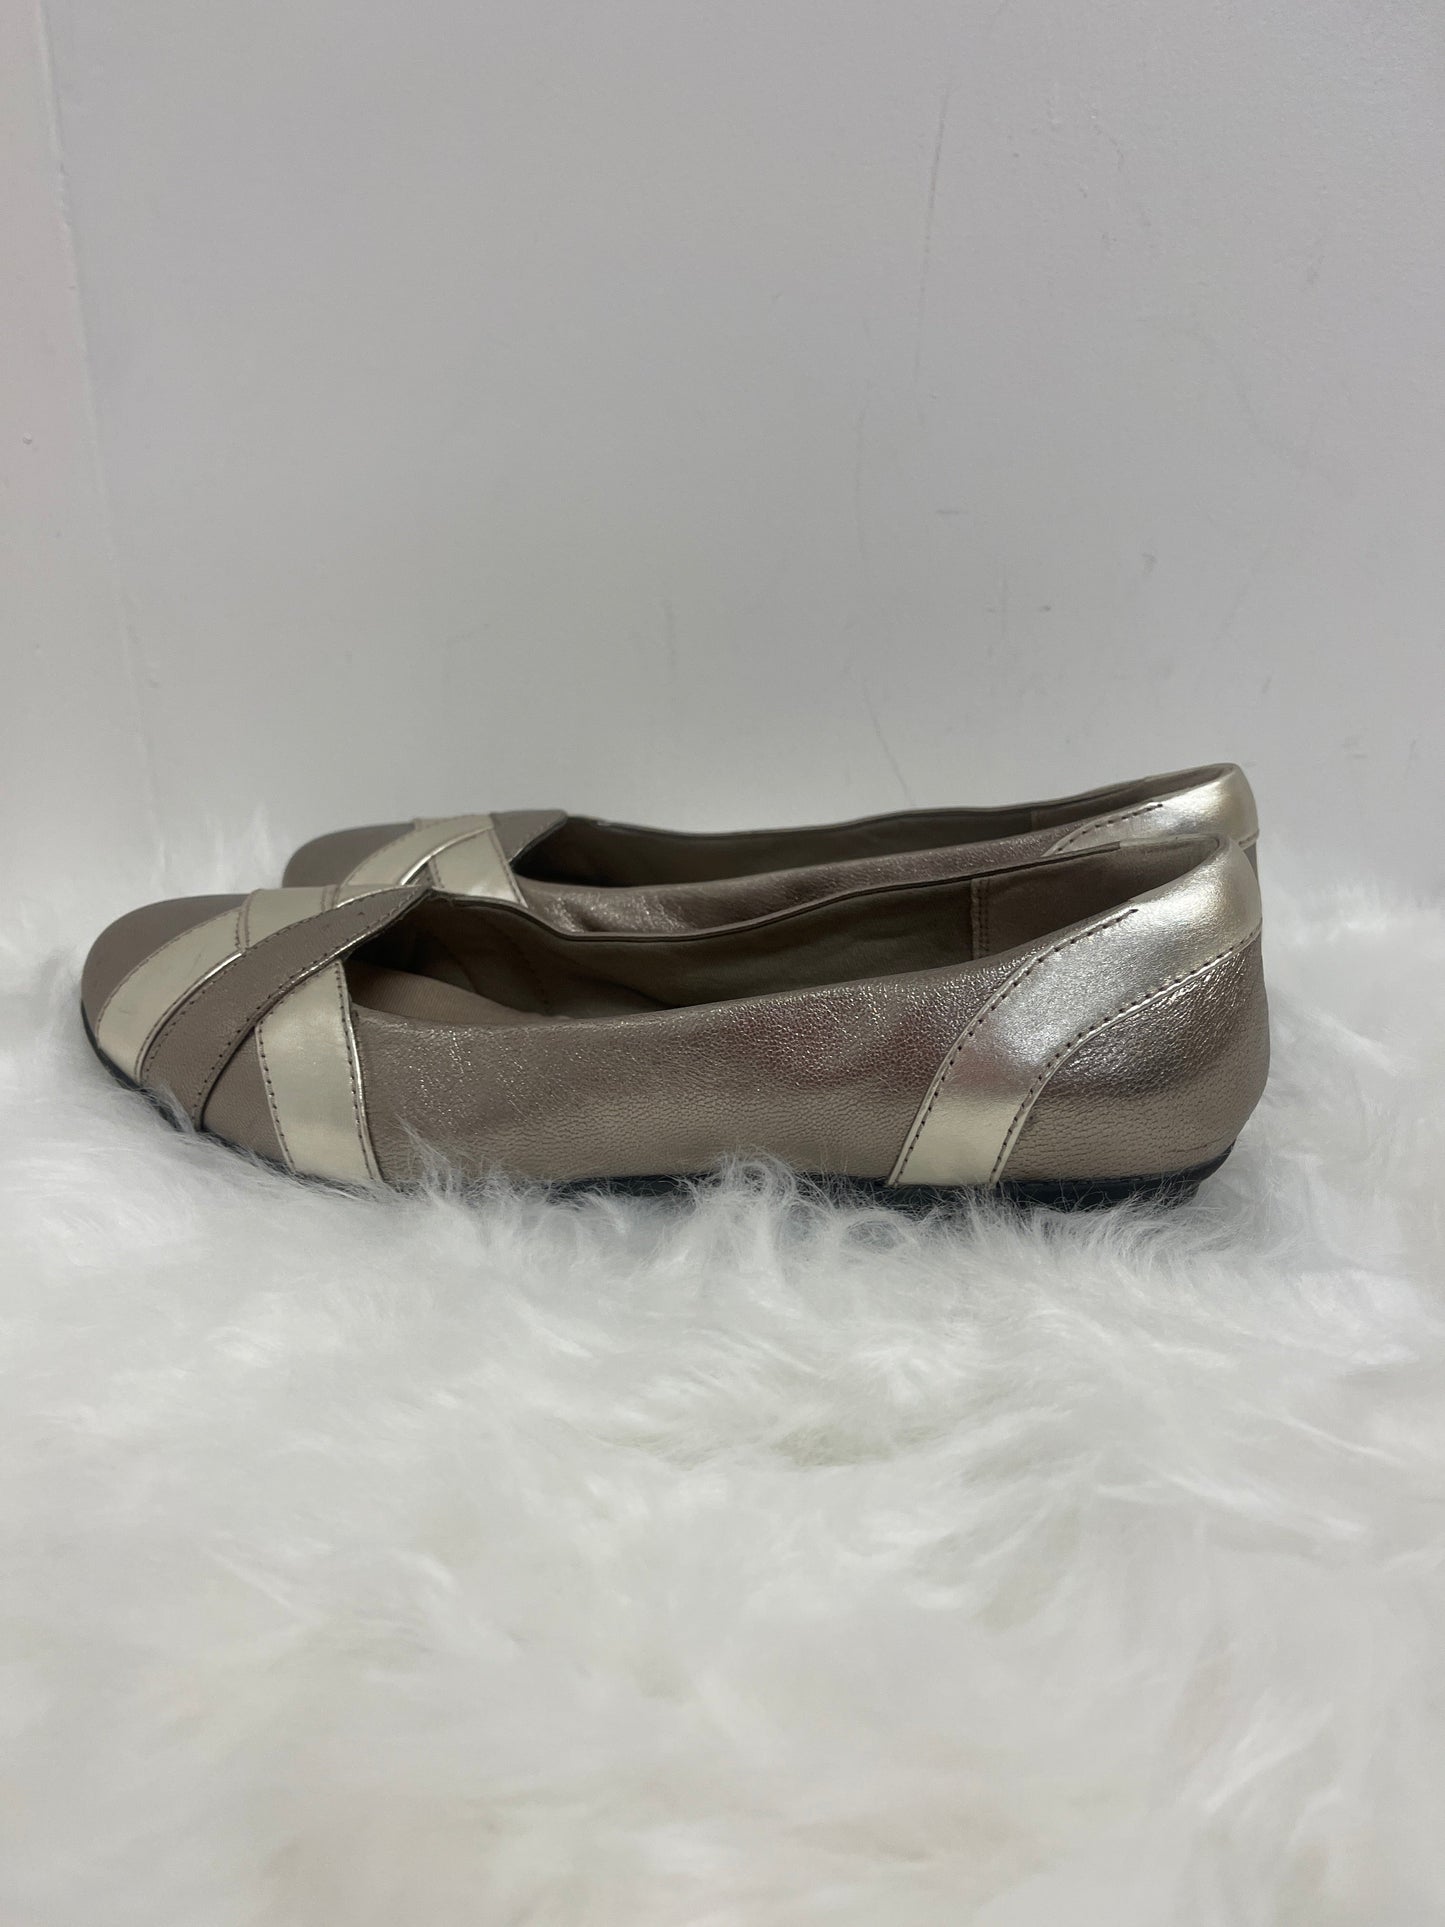 Shoes Flats By Clarks  Size: 10